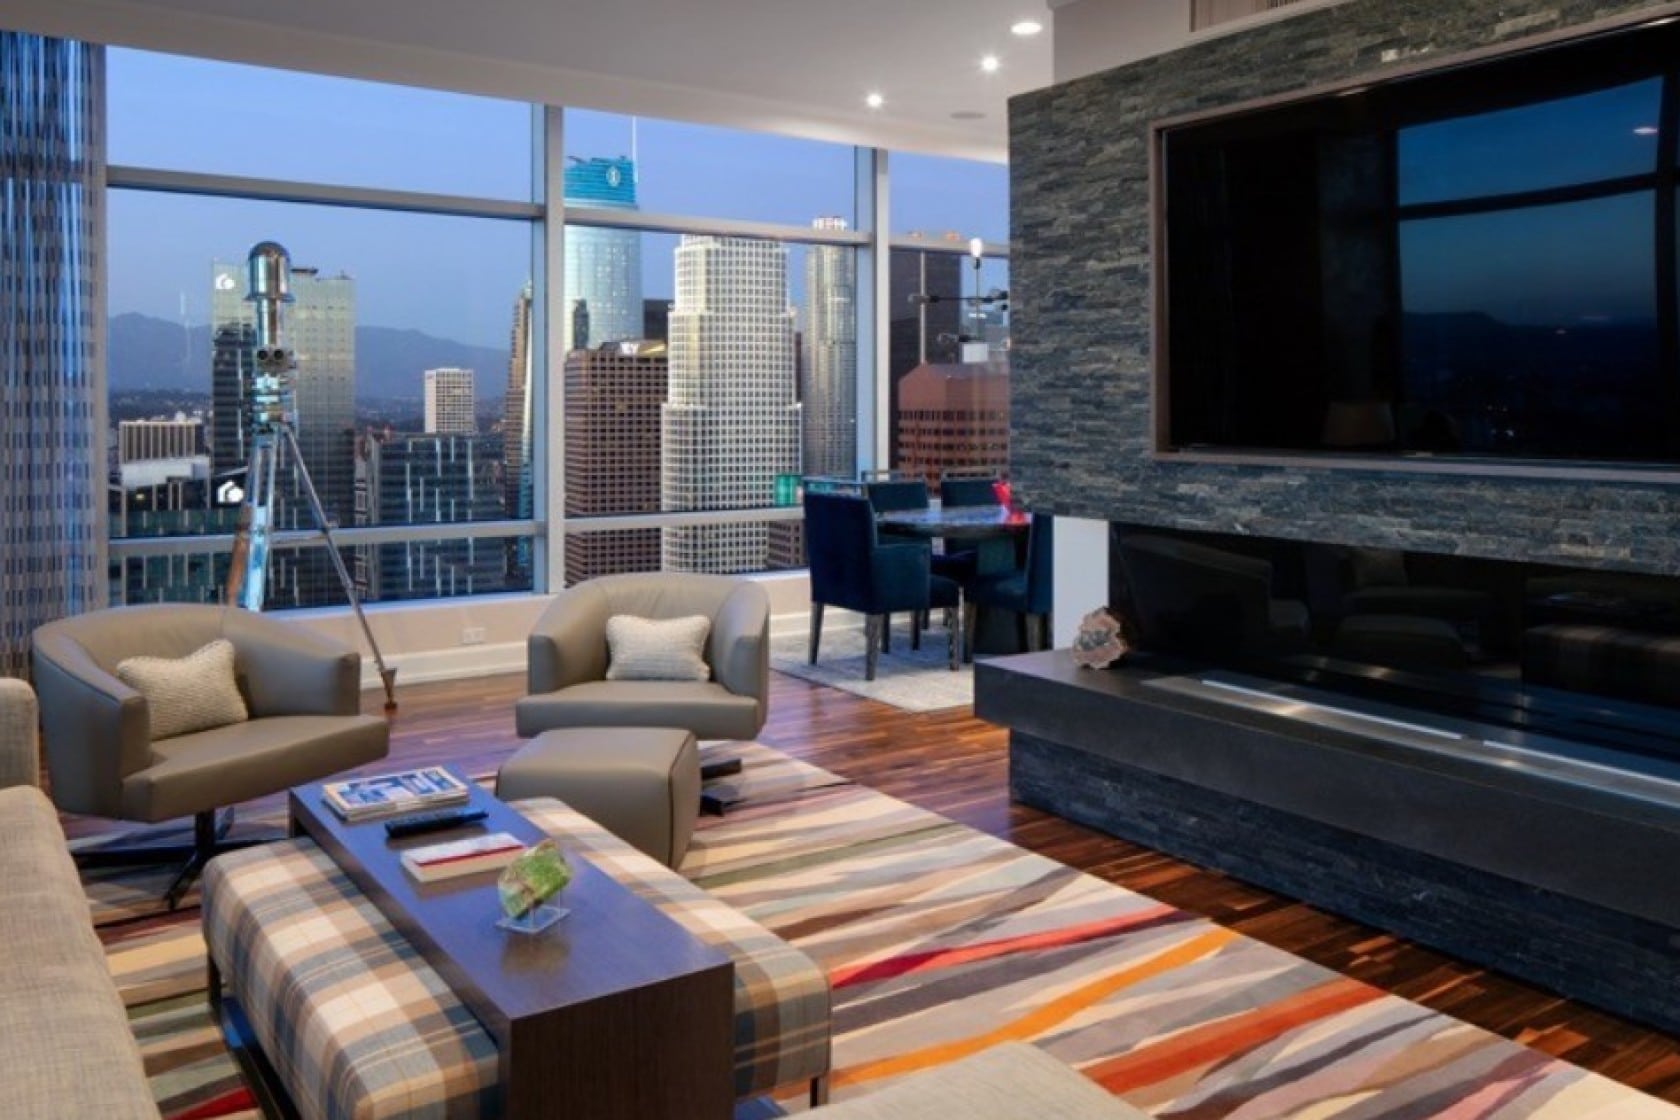 Inside Look At Clippers’ Superstar Kawhi Leonard’s New Penthouse